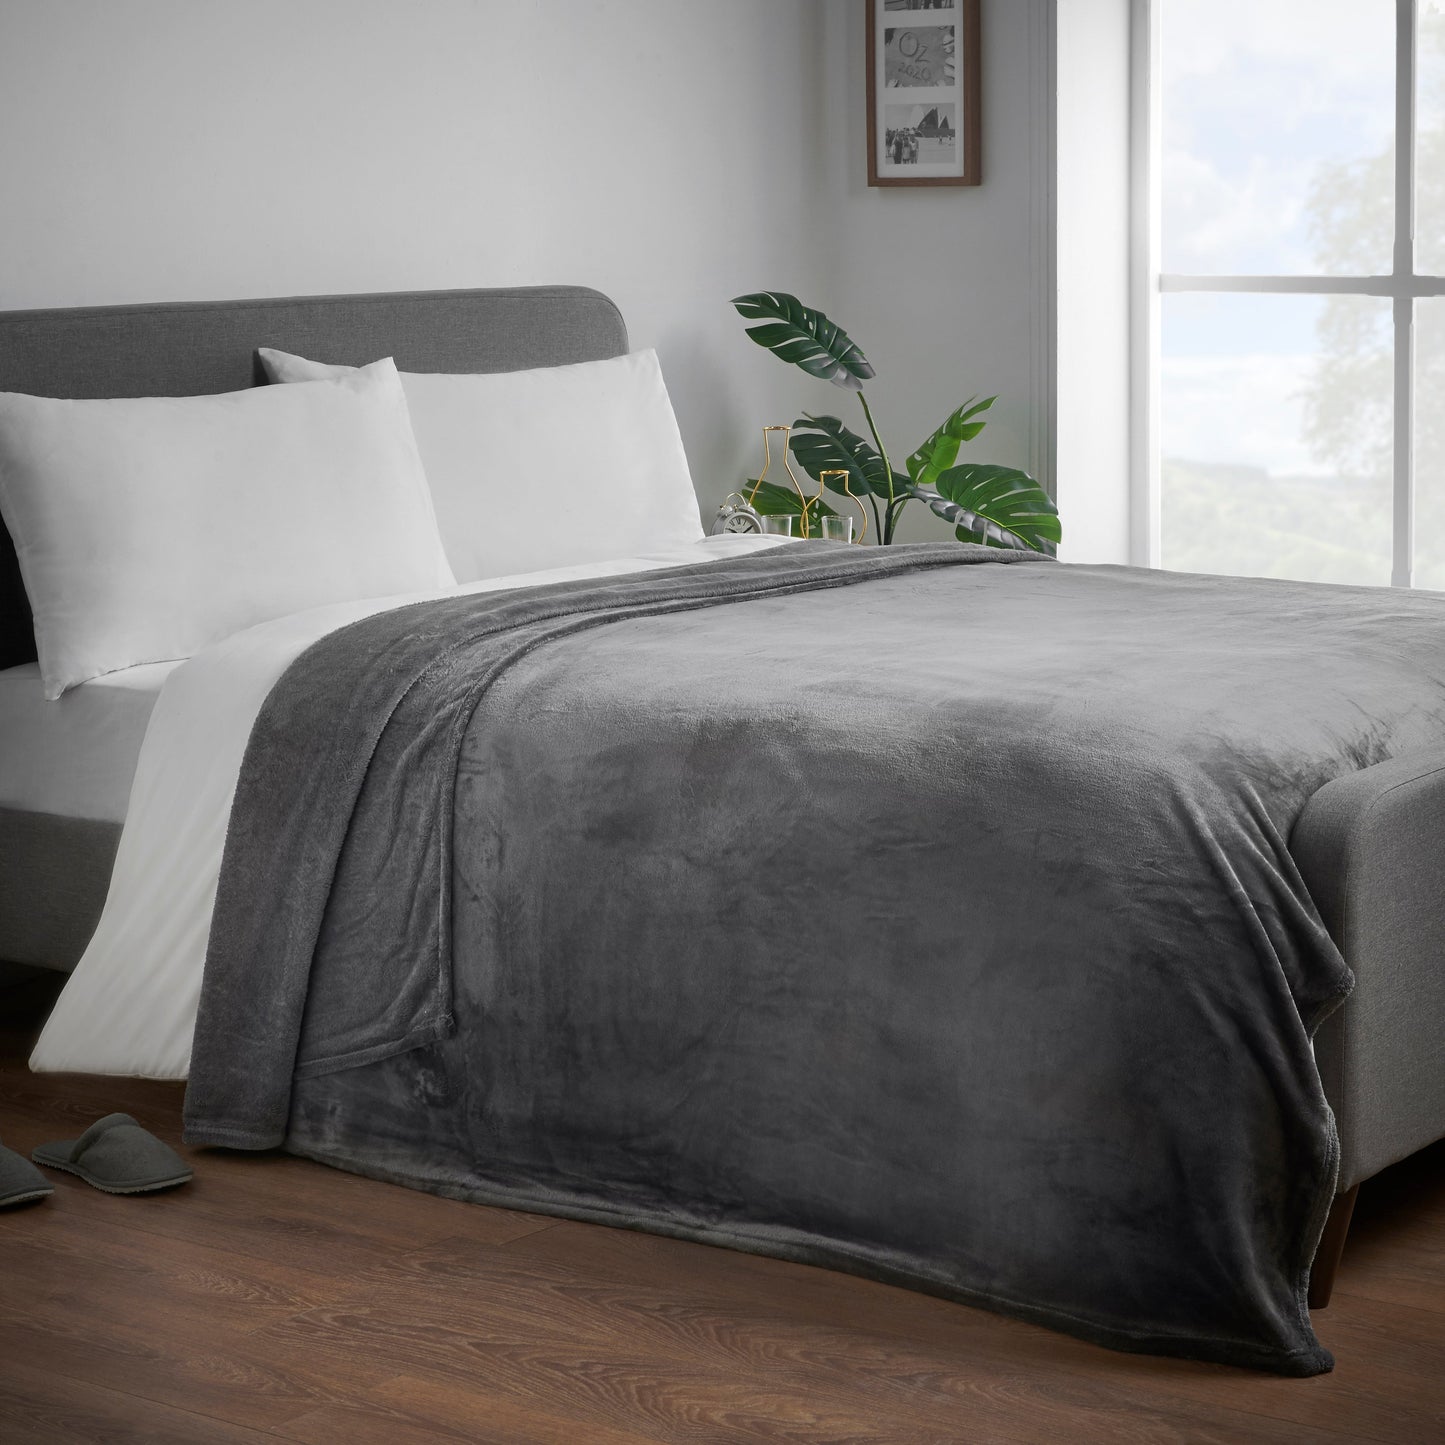 Super Soft Flannel Throw - Charcoal